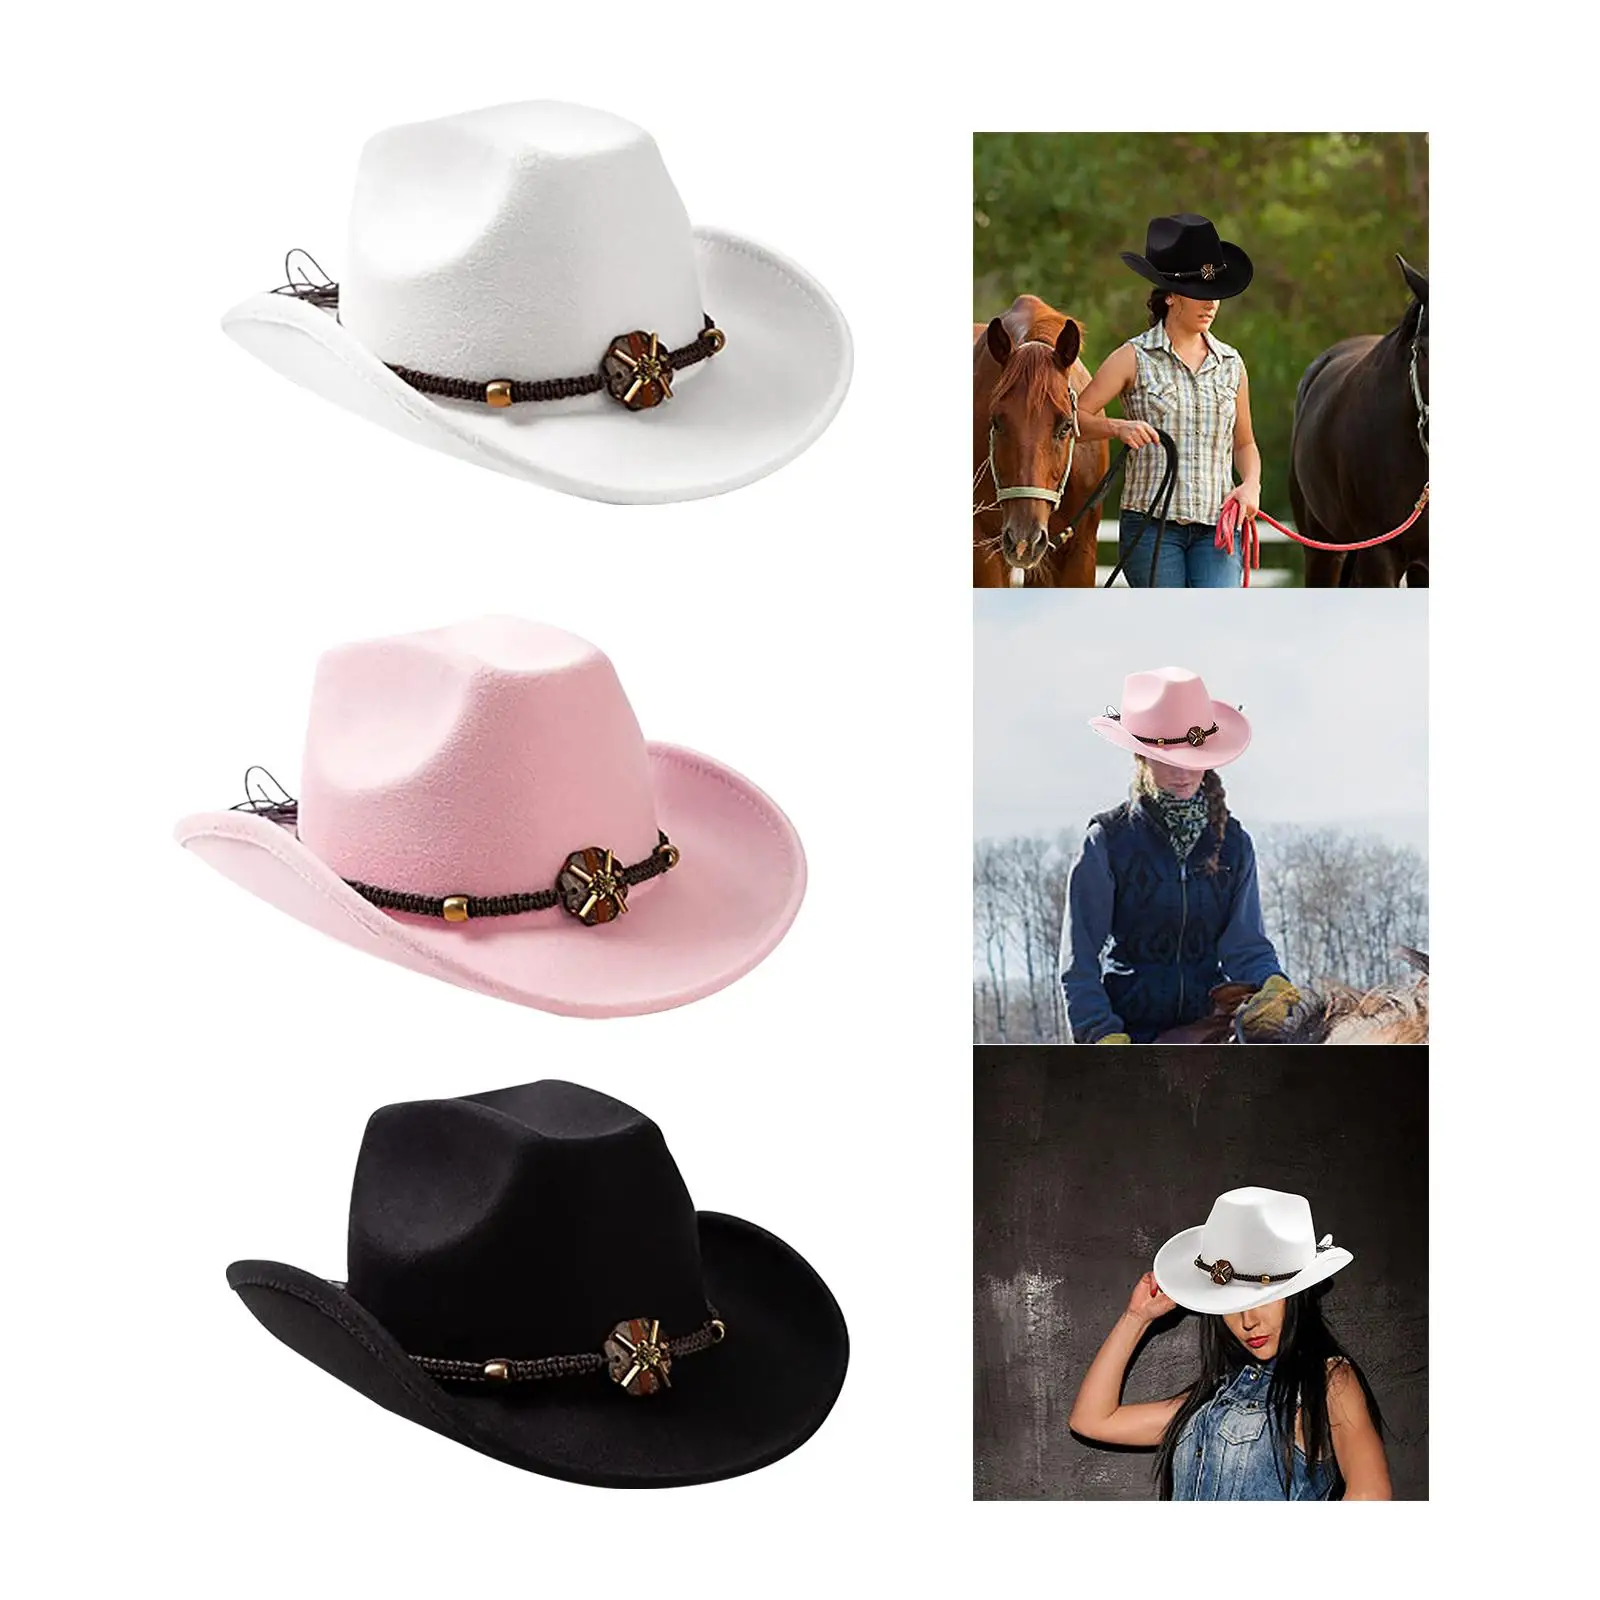 Classic Cowboy Cowgirl Hat Props Big Brim Fancy Dress Costume Cosplay Sun Hats Sunshade for Adults Beach Play Traveling Outdoor